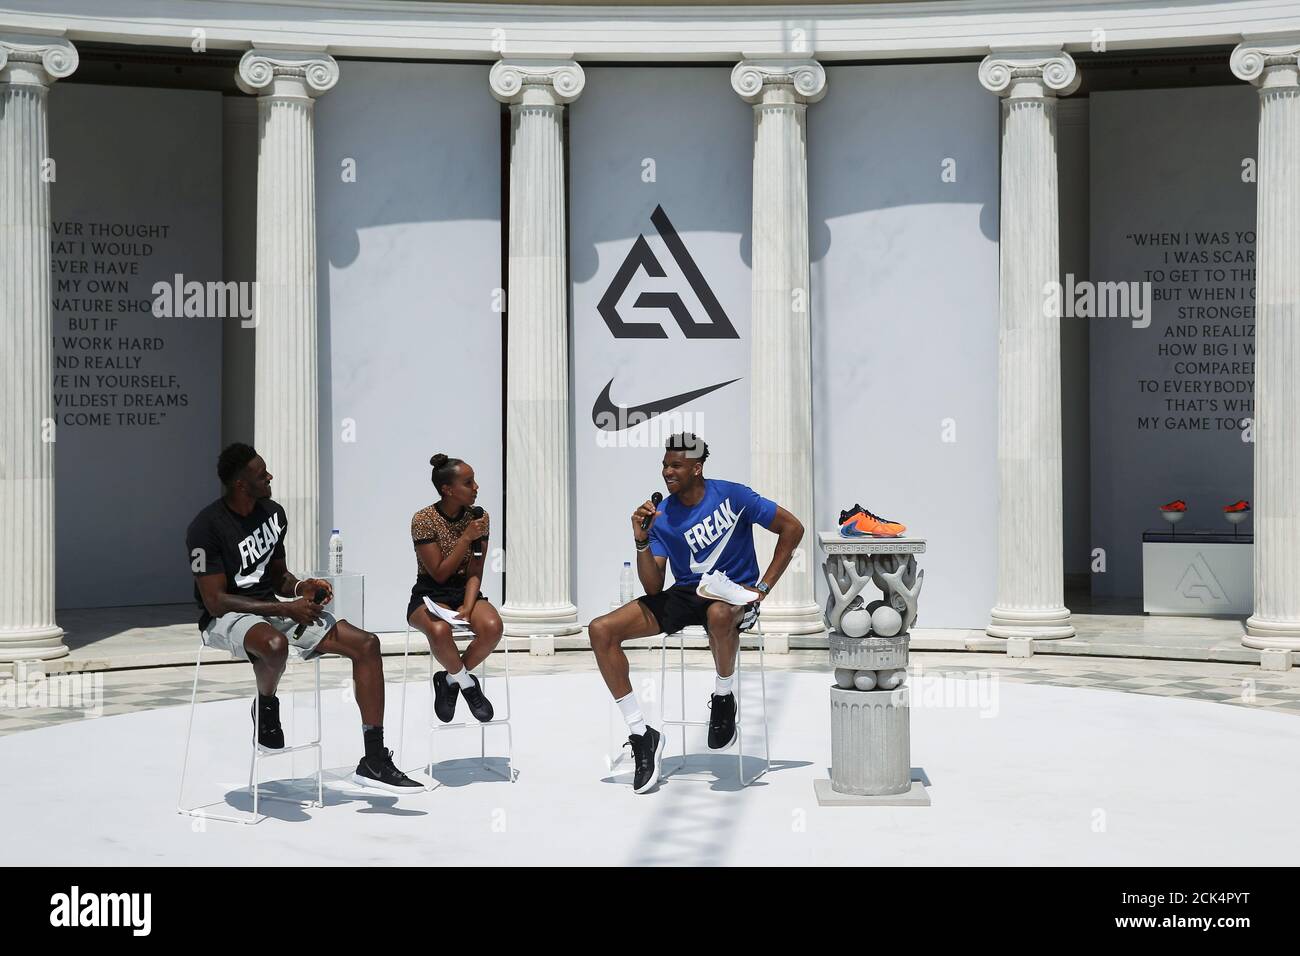 Milwaukee Bucks forward and NBA's MVP Giannis Antetokounmpo speaks during  an official presentation event of a Nike Shoe, in Athens, Greece June 28,  2019. REUTERS/Costas Baltas Stock Photo - Alamy